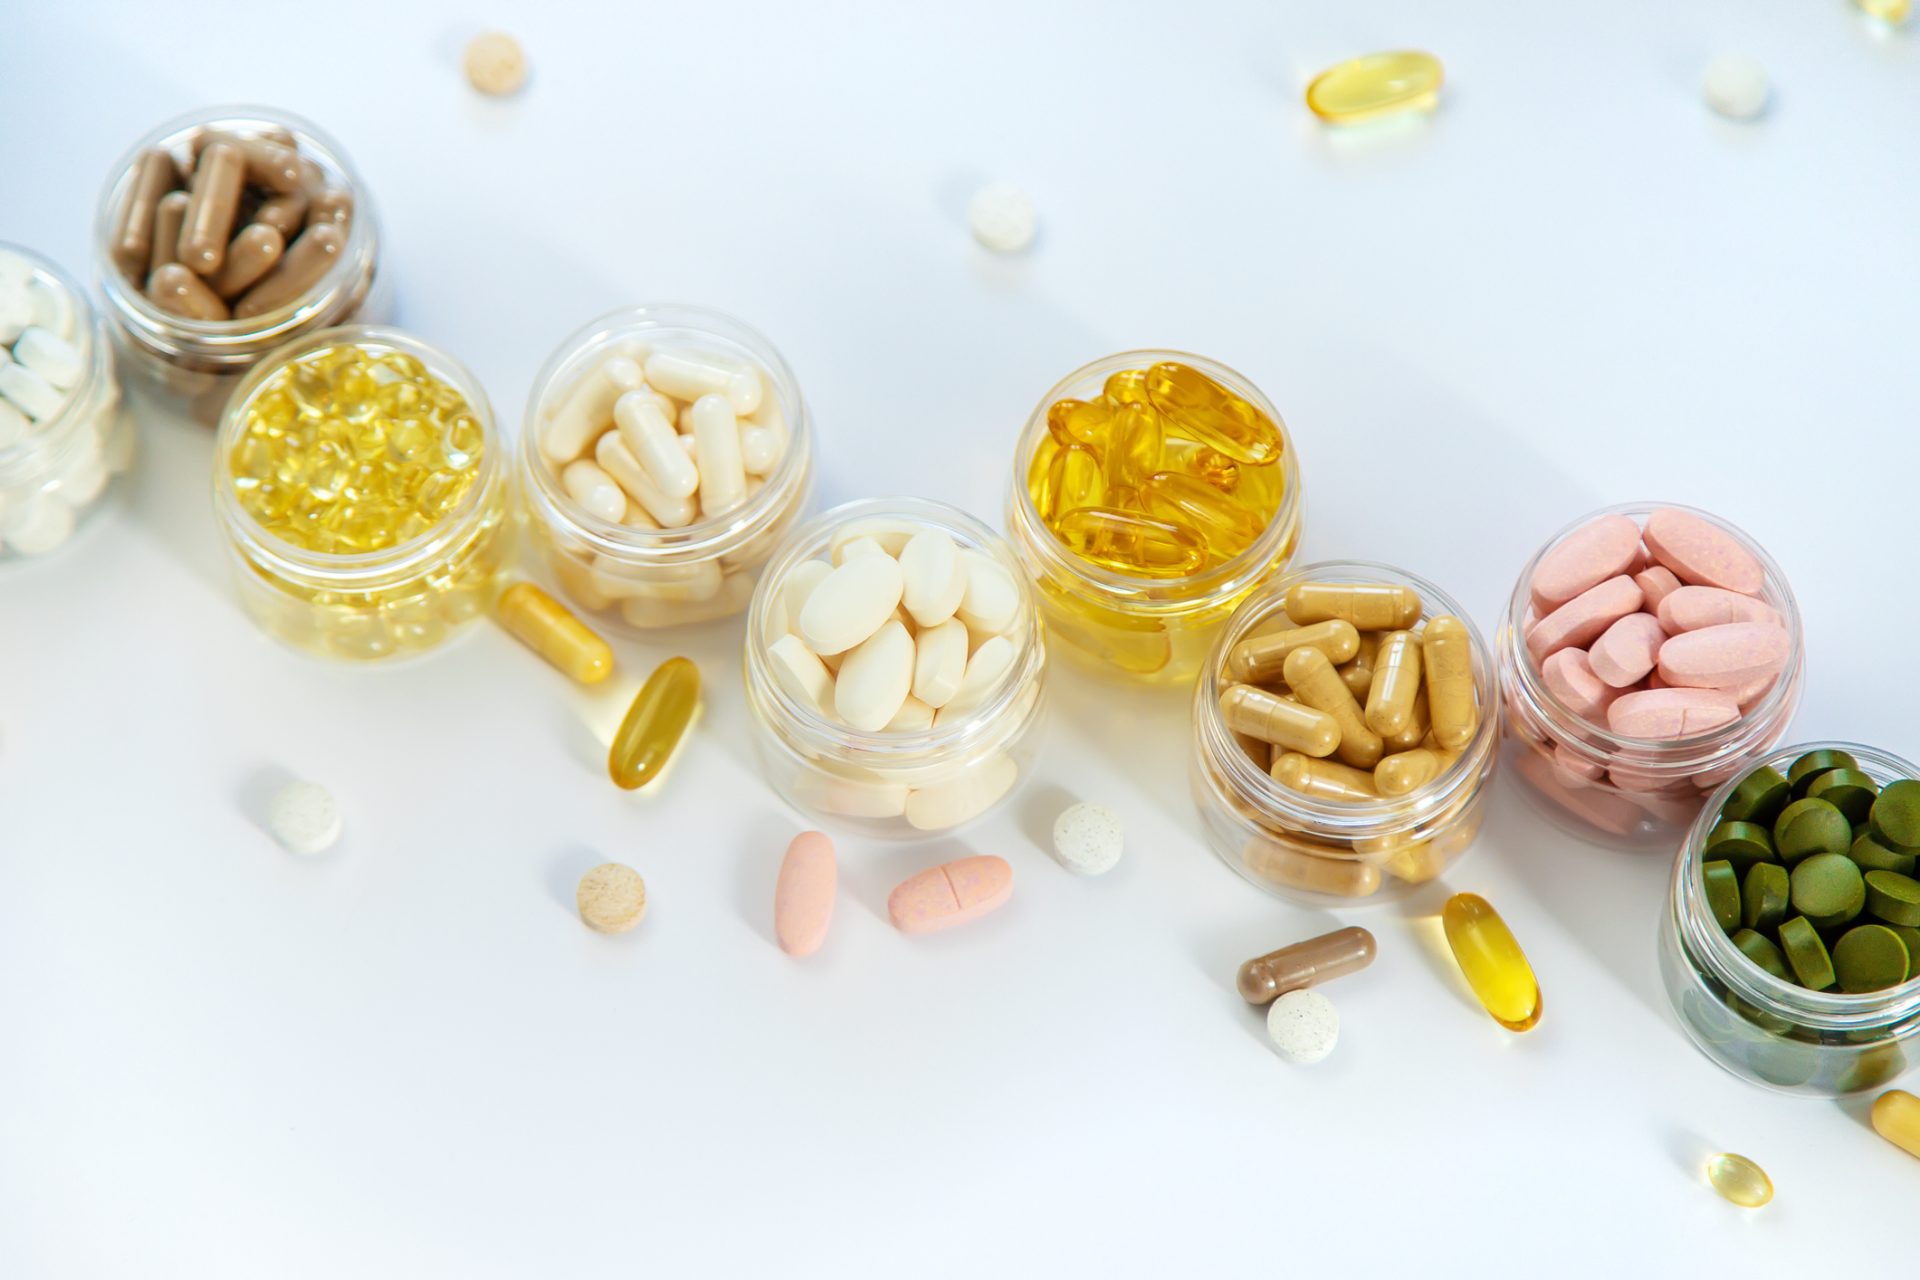 Dietary supplements in bowls